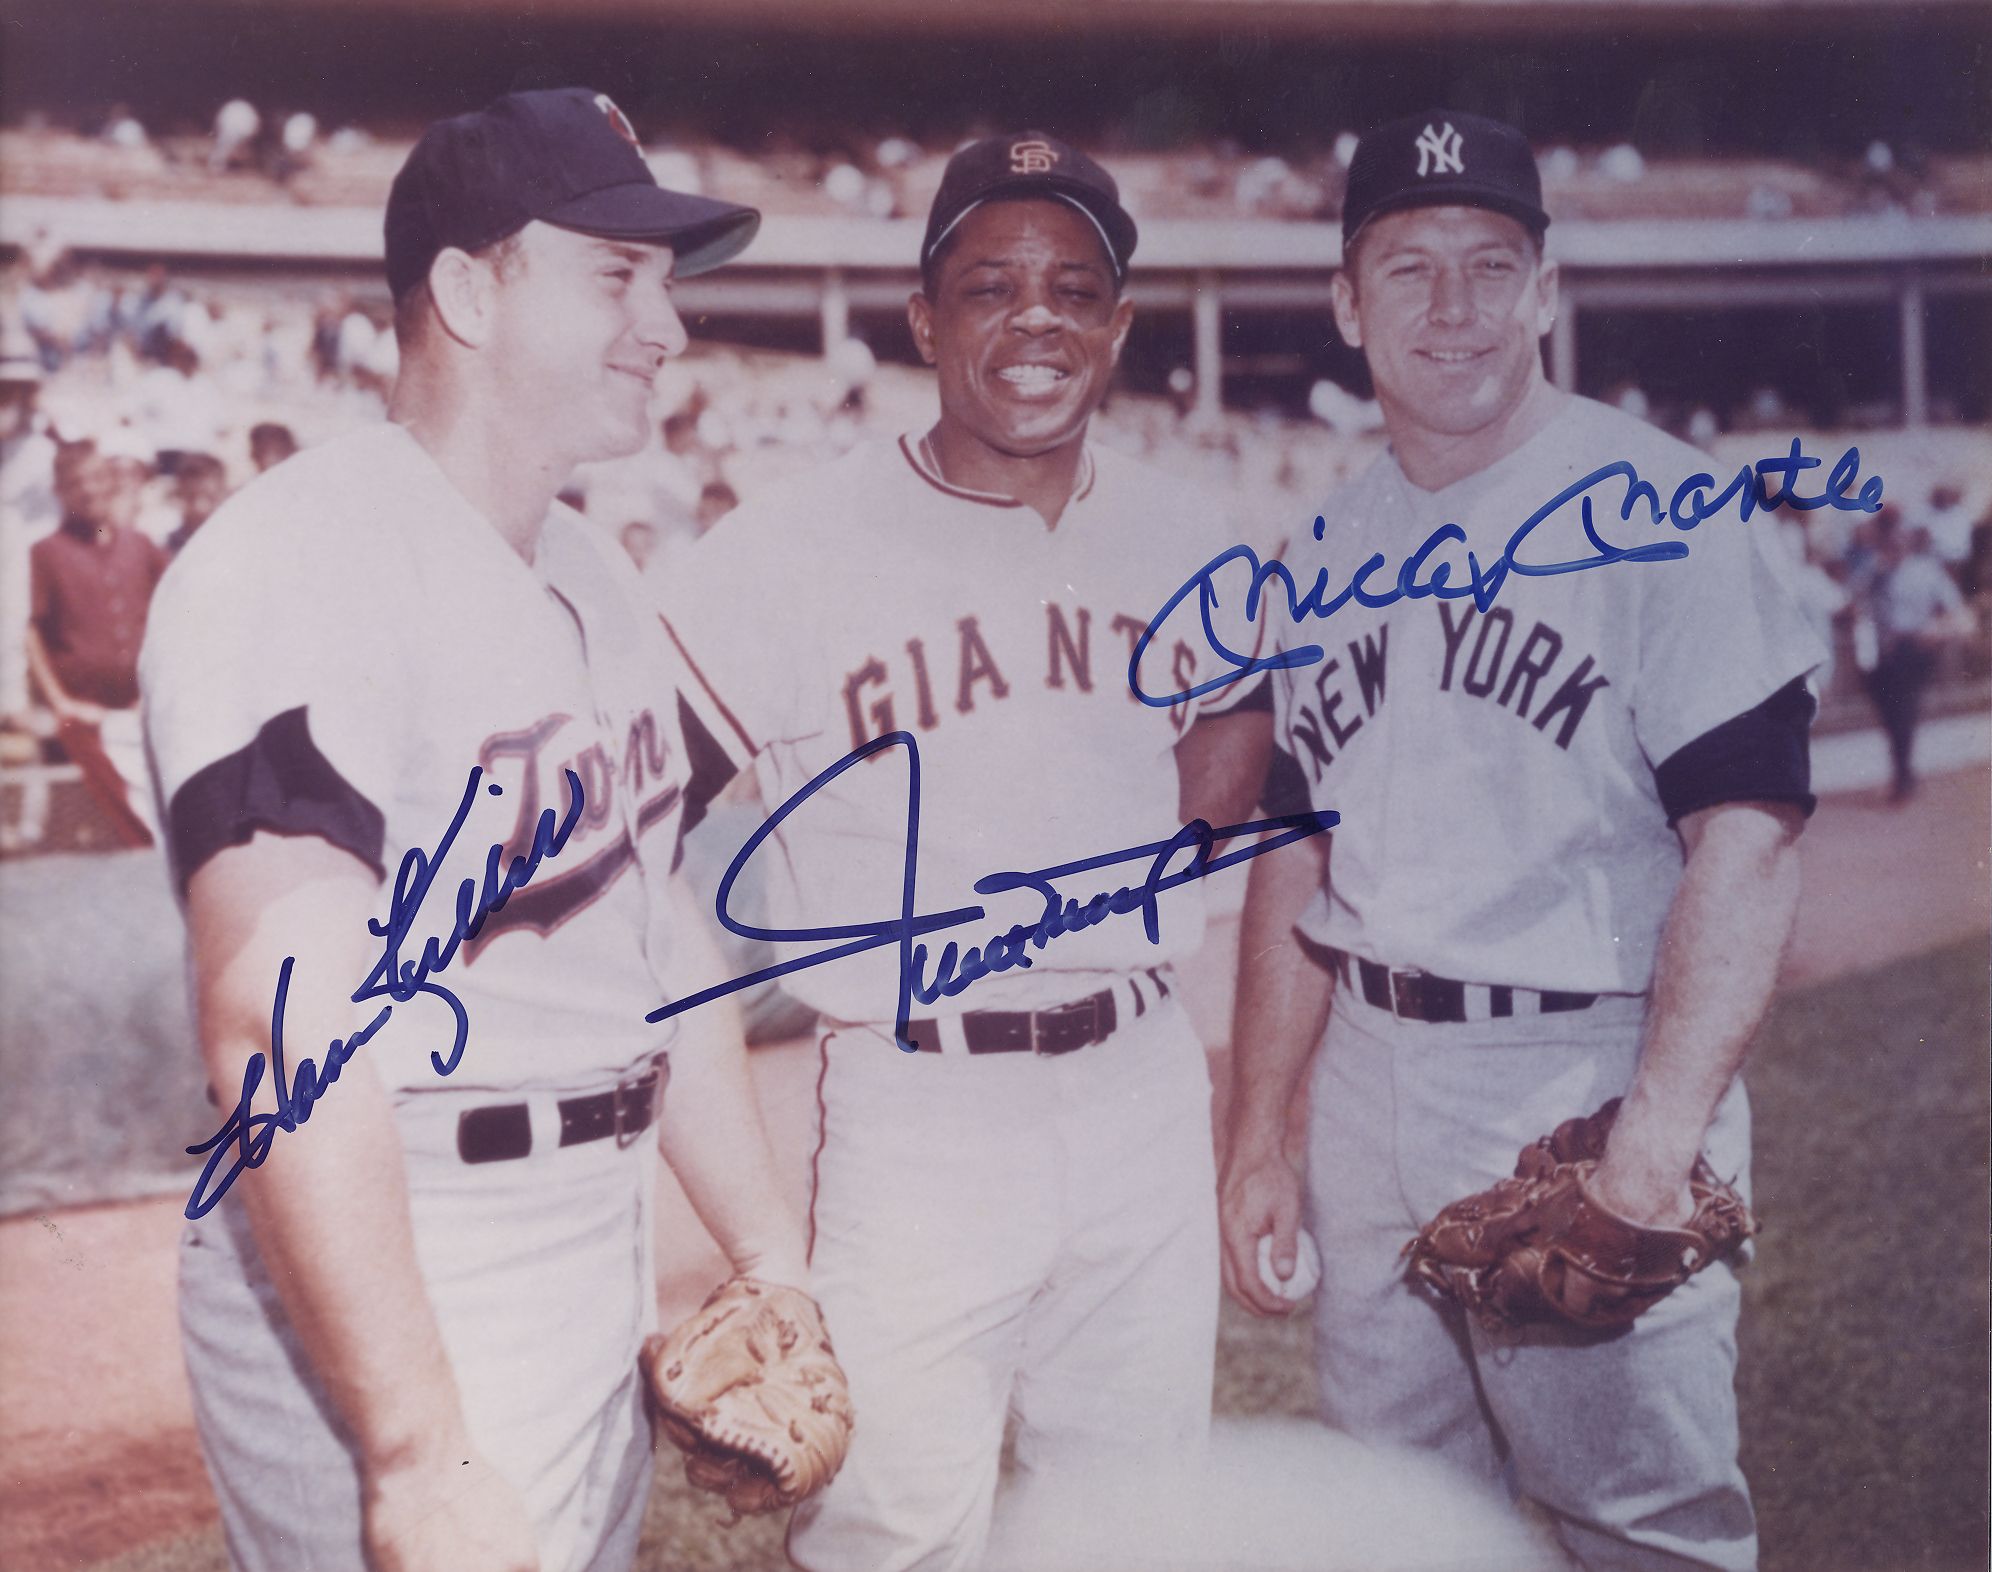 August 9, 1971: Willie Mays and Harmon Killebrew delight Twins fans in  exhibition – Society for American Baseball Research